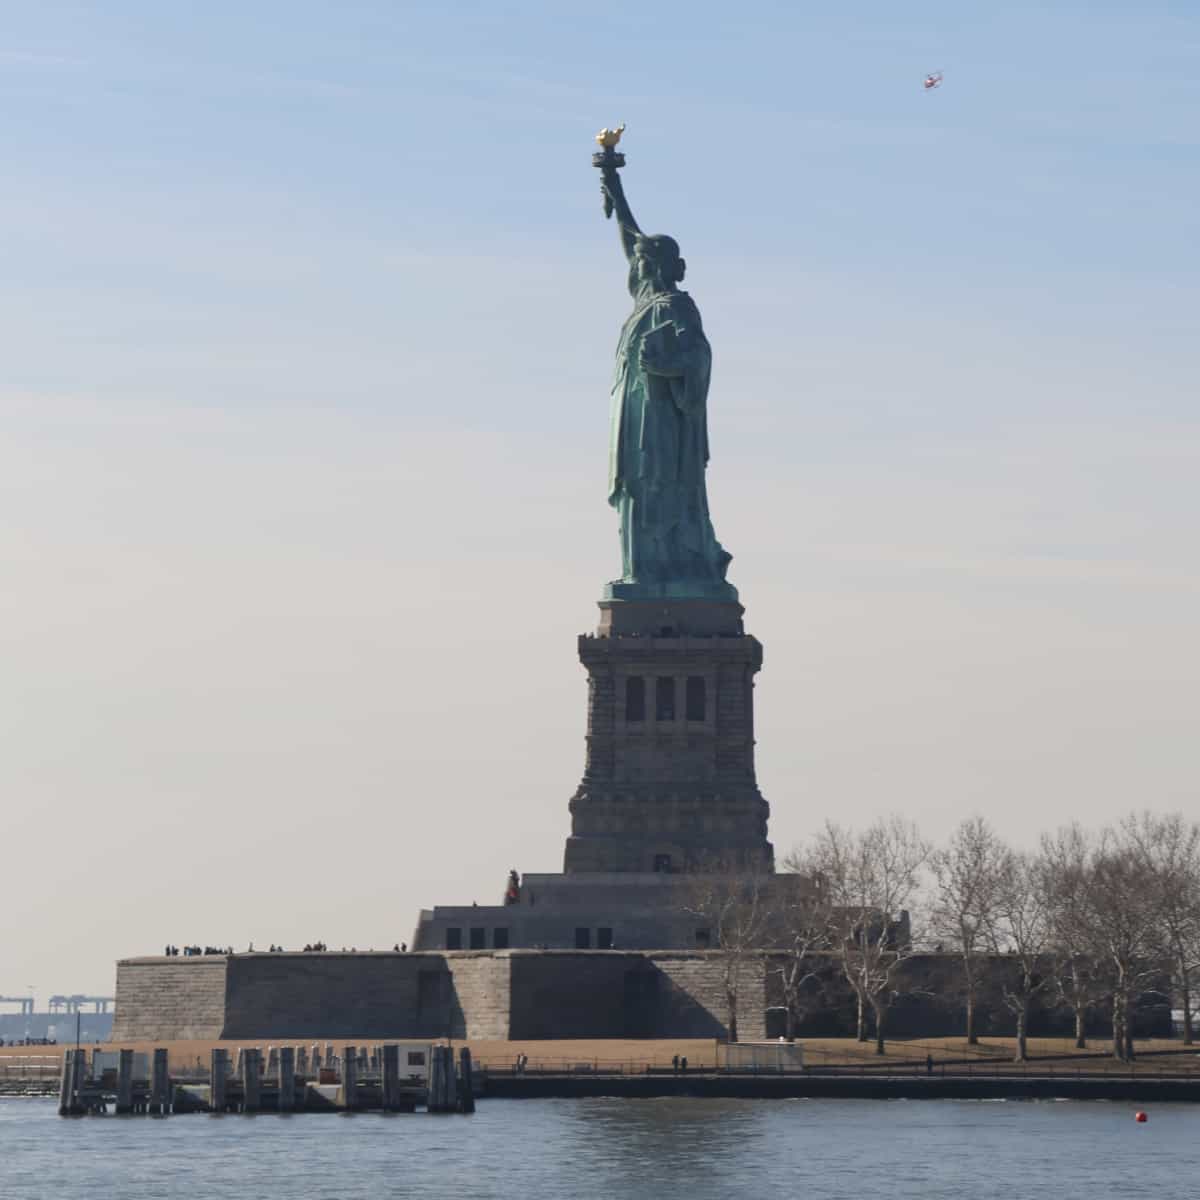 The Statue of Liberty stands tall overlooking New York